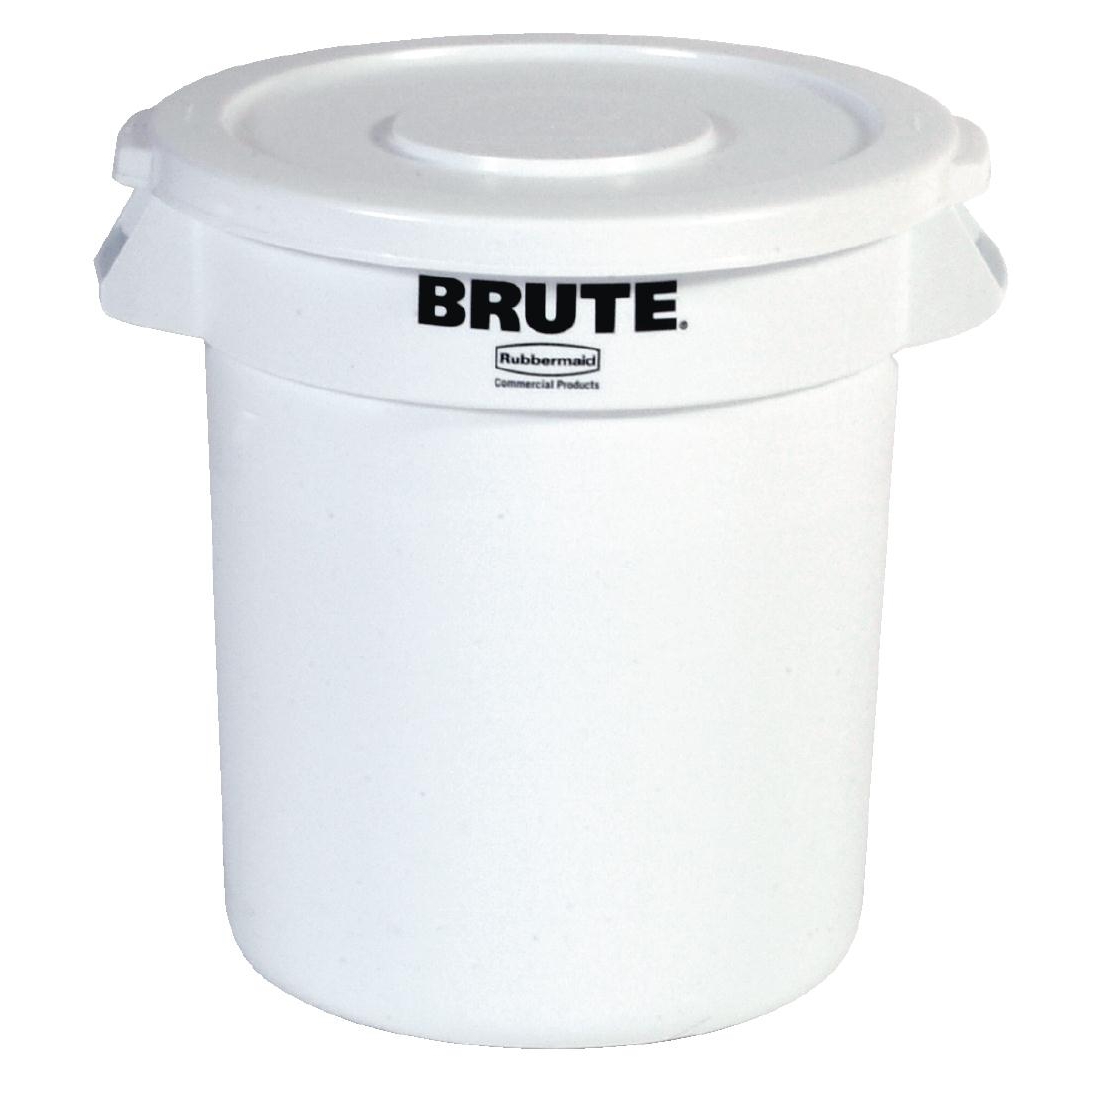 Rubbermaid Round Brute Container 37.9Ltr Container White